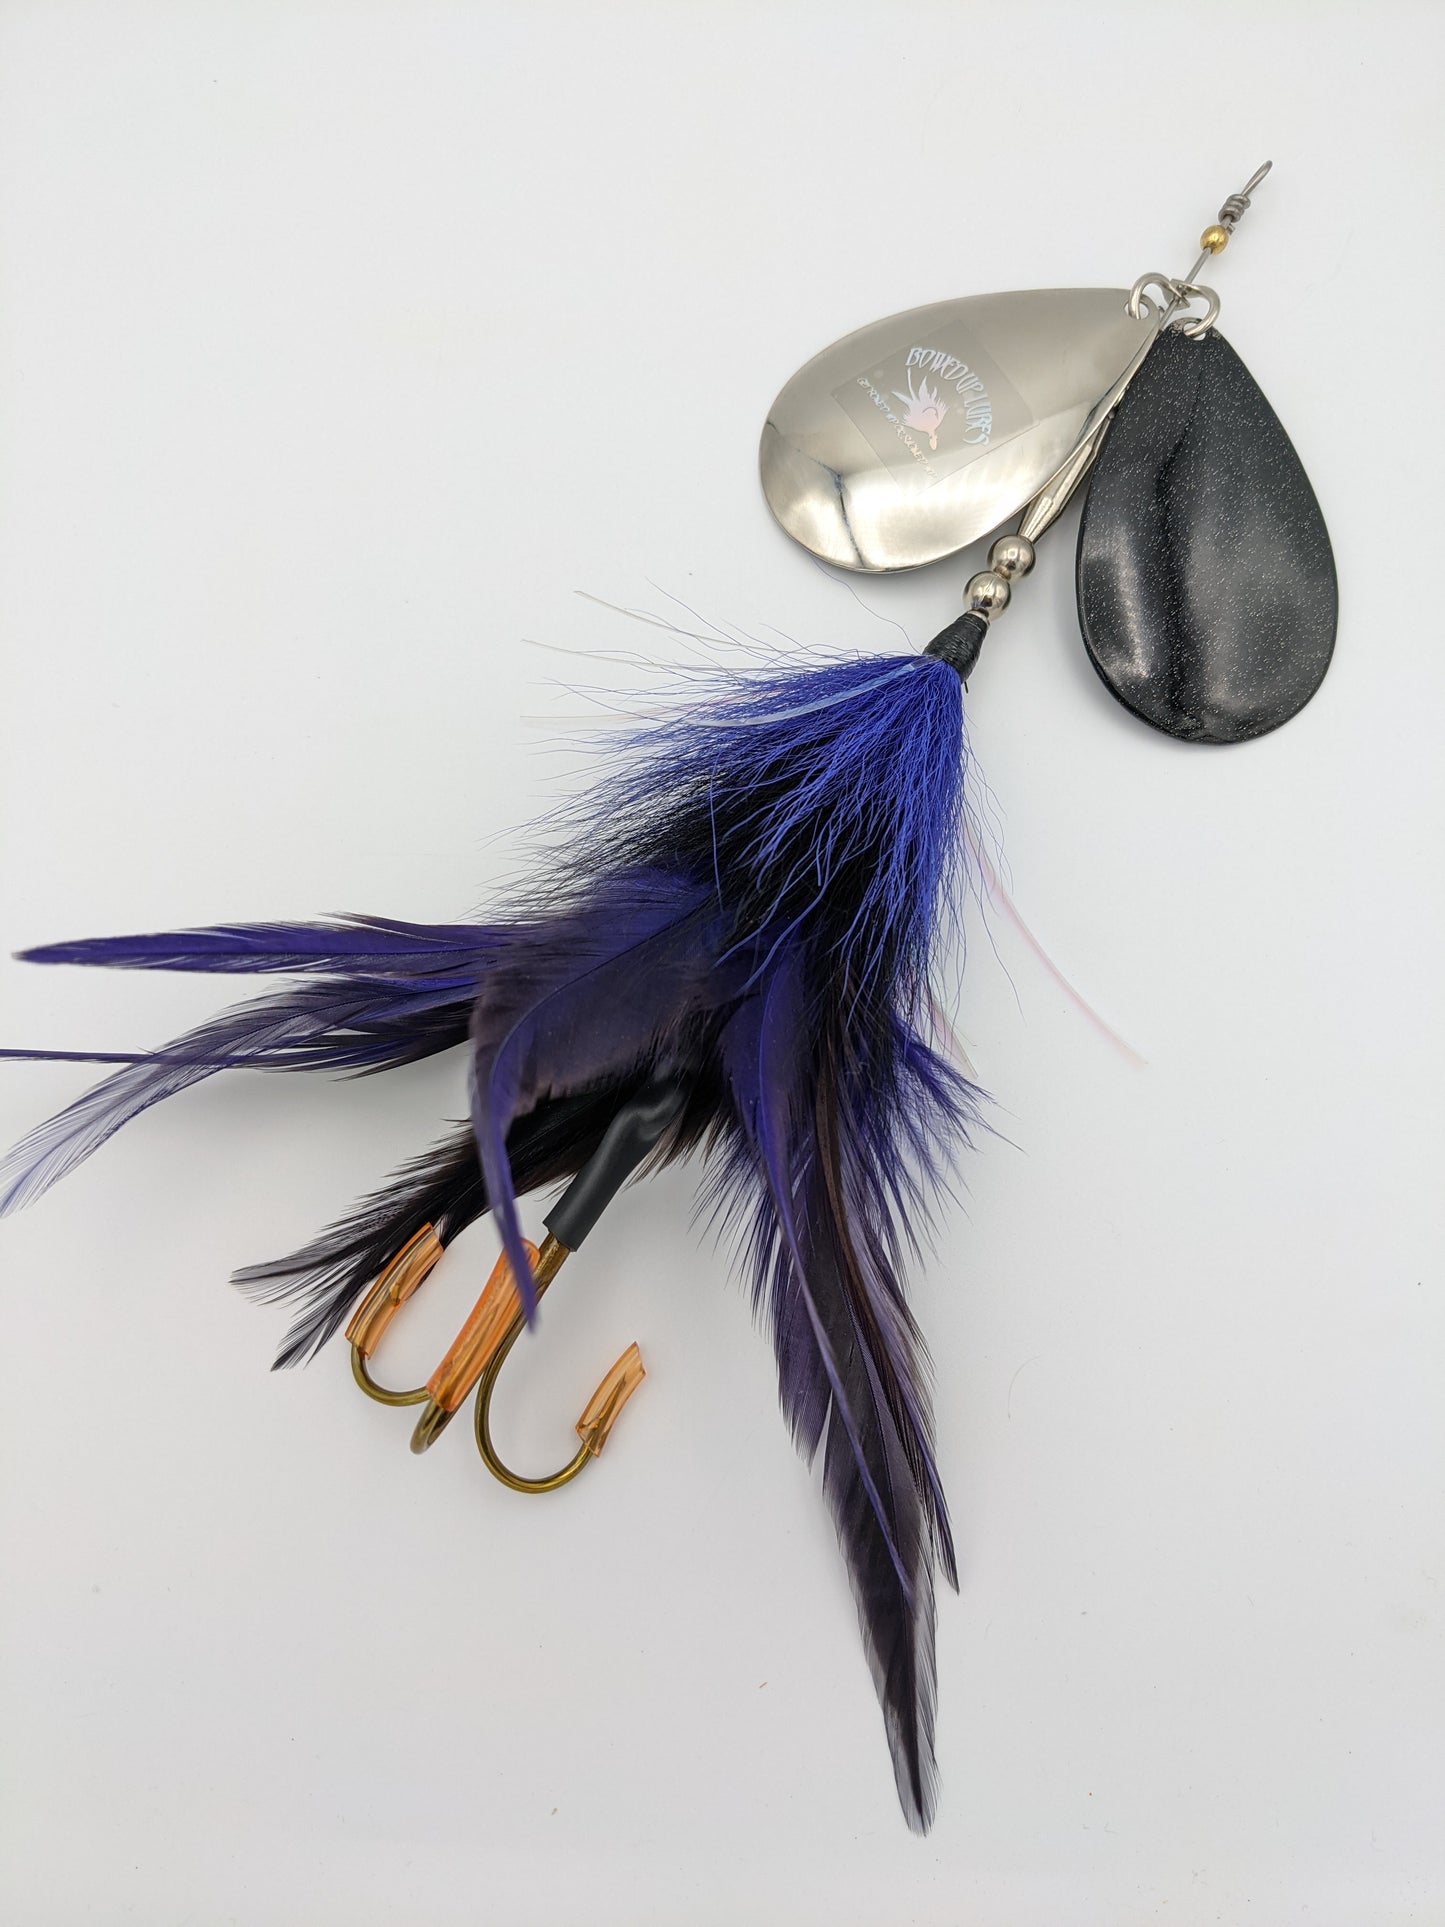 Bowed Up Lures Musky Bucktail